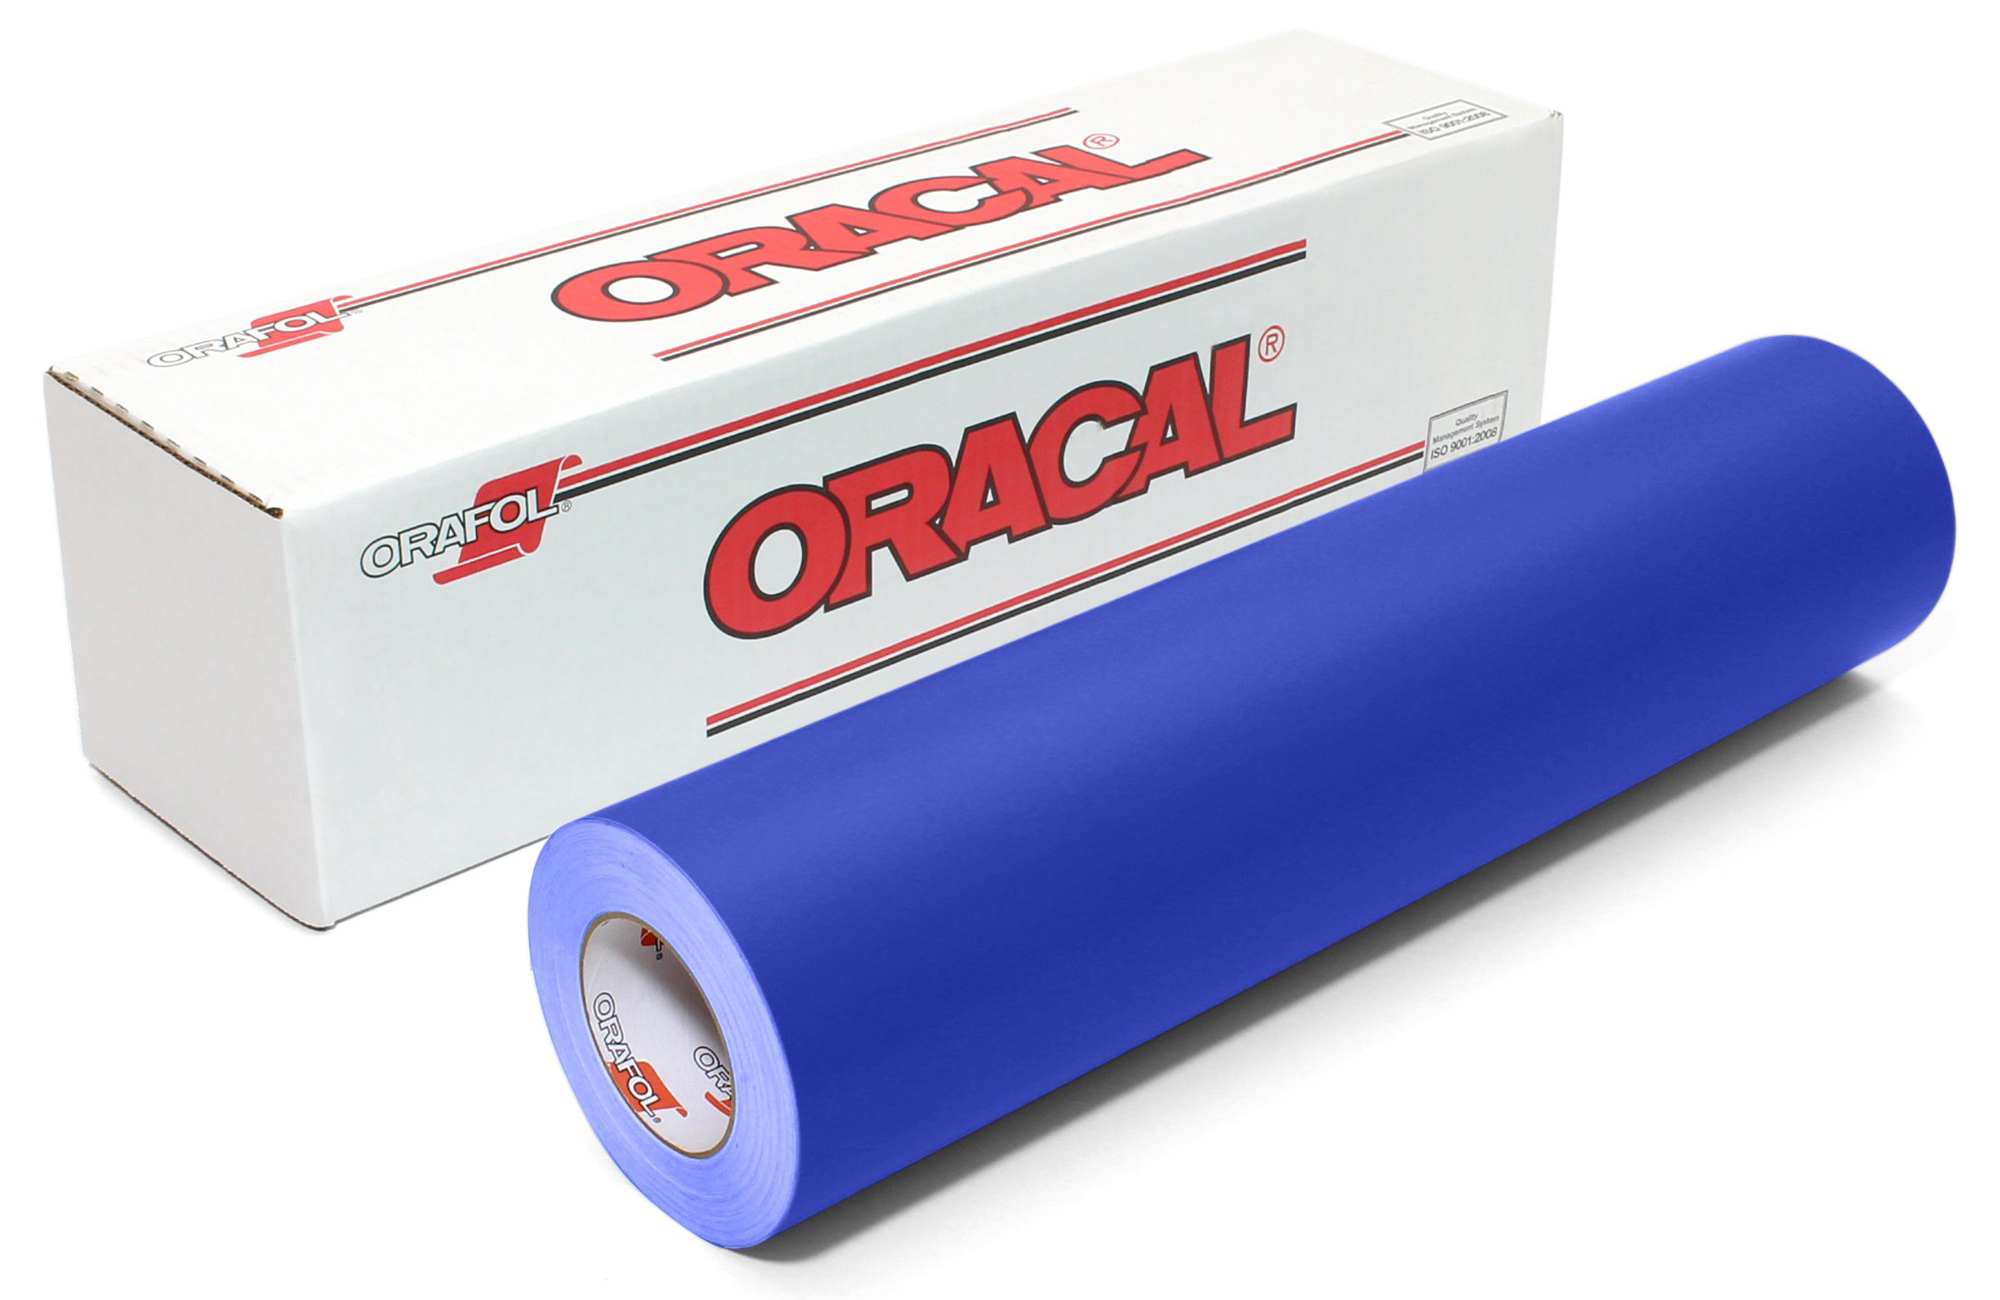 Oracal 631 Exhibition Calendered PVC Film